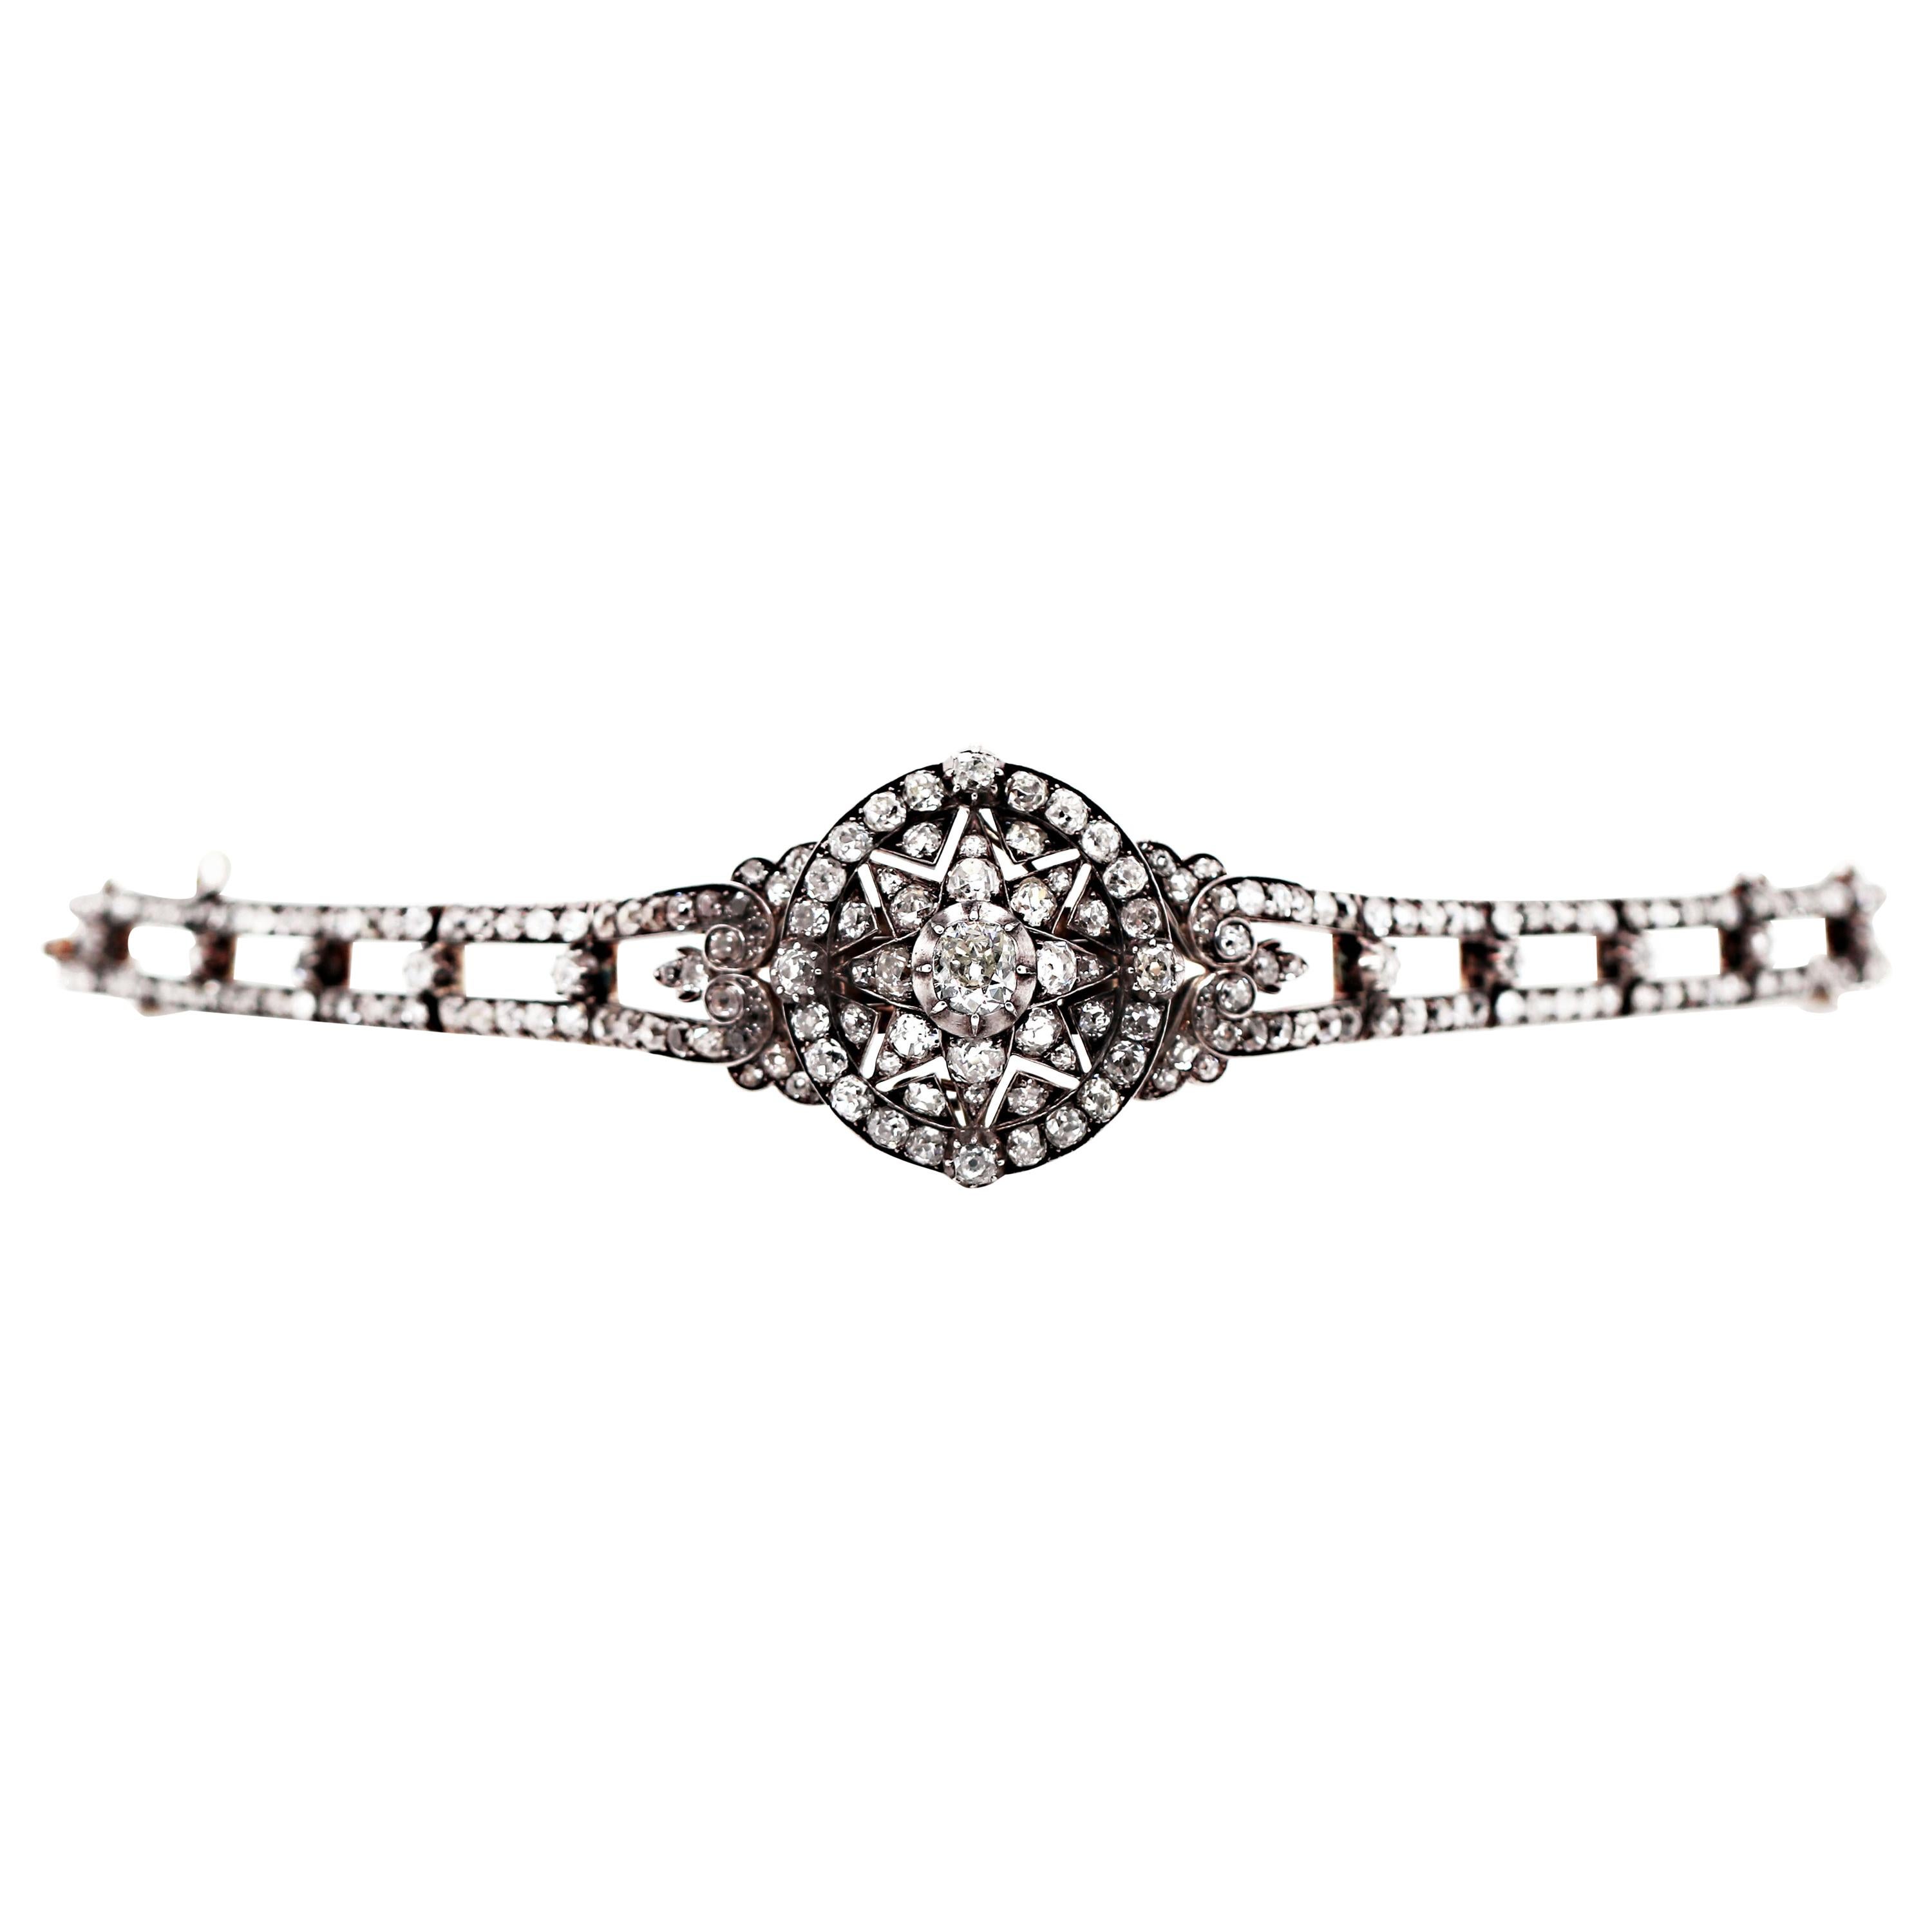 An exceptional piece handmade in the mid 1800's that can be worn as both a bracelet and pendant. This rare piece of jewellery is in immaculate condition for its age, featuring an impressive total of 125 old cut diamonds all mounted in silver on